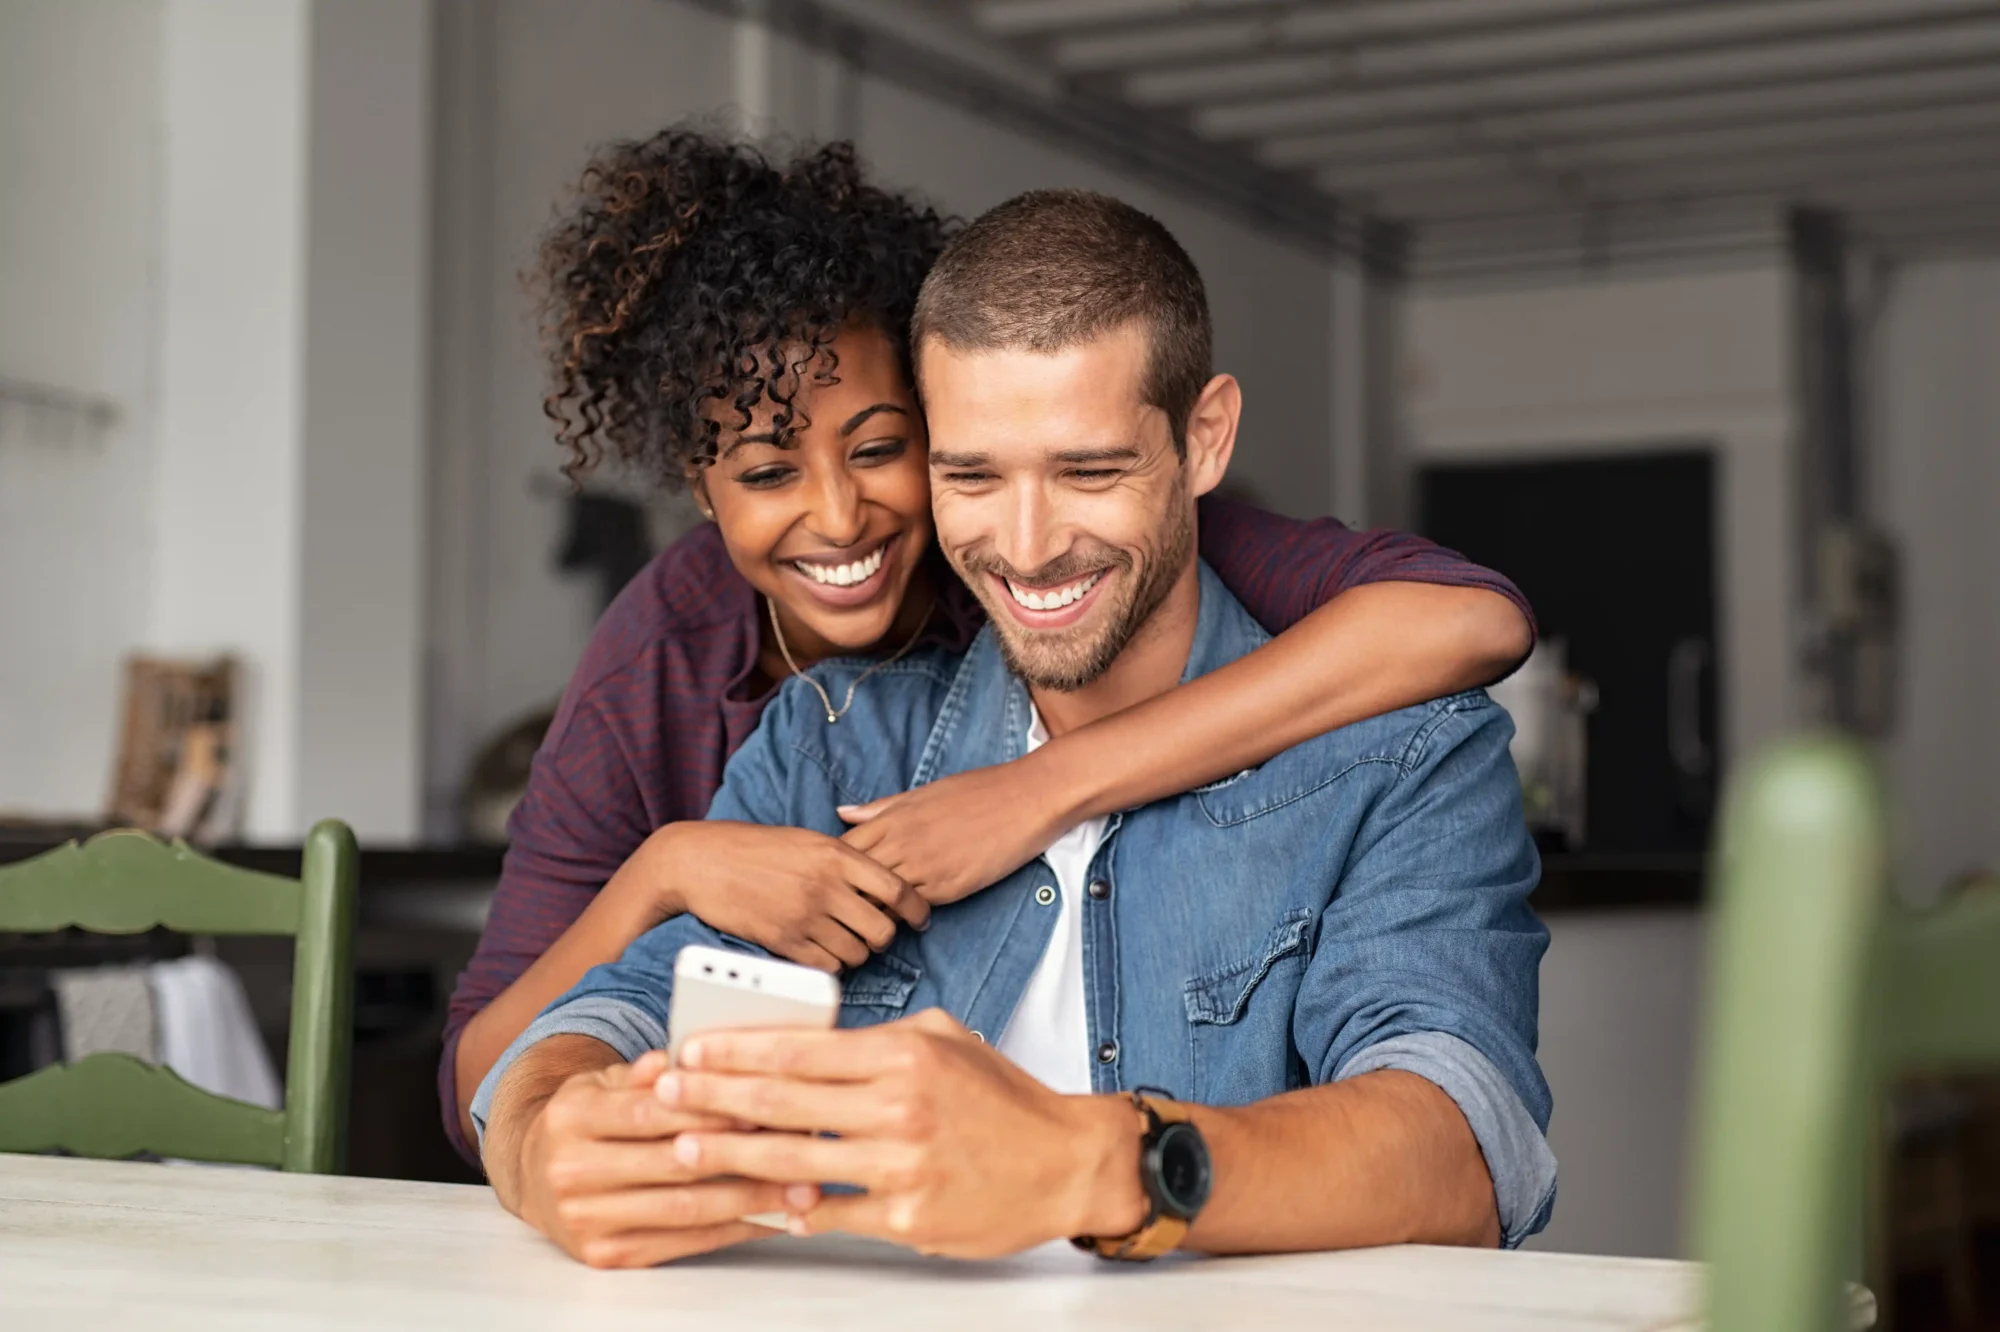 Young couple smiling and looking at a phone